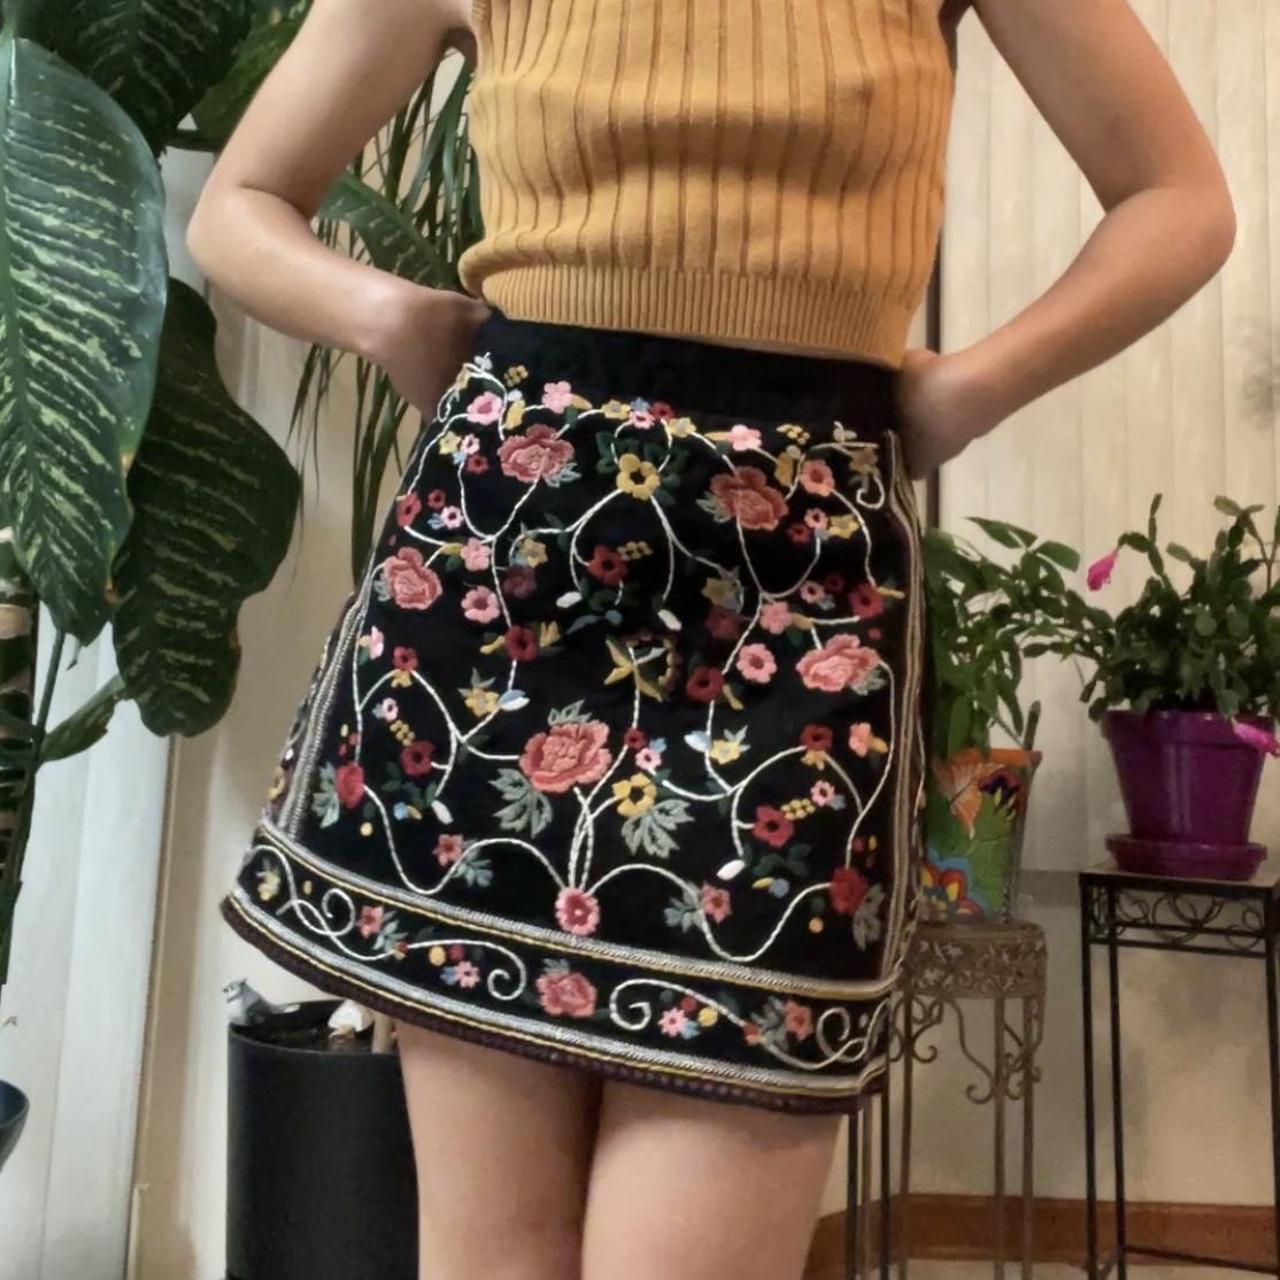 Vintage floral embroidered skirt, This skirt gives...